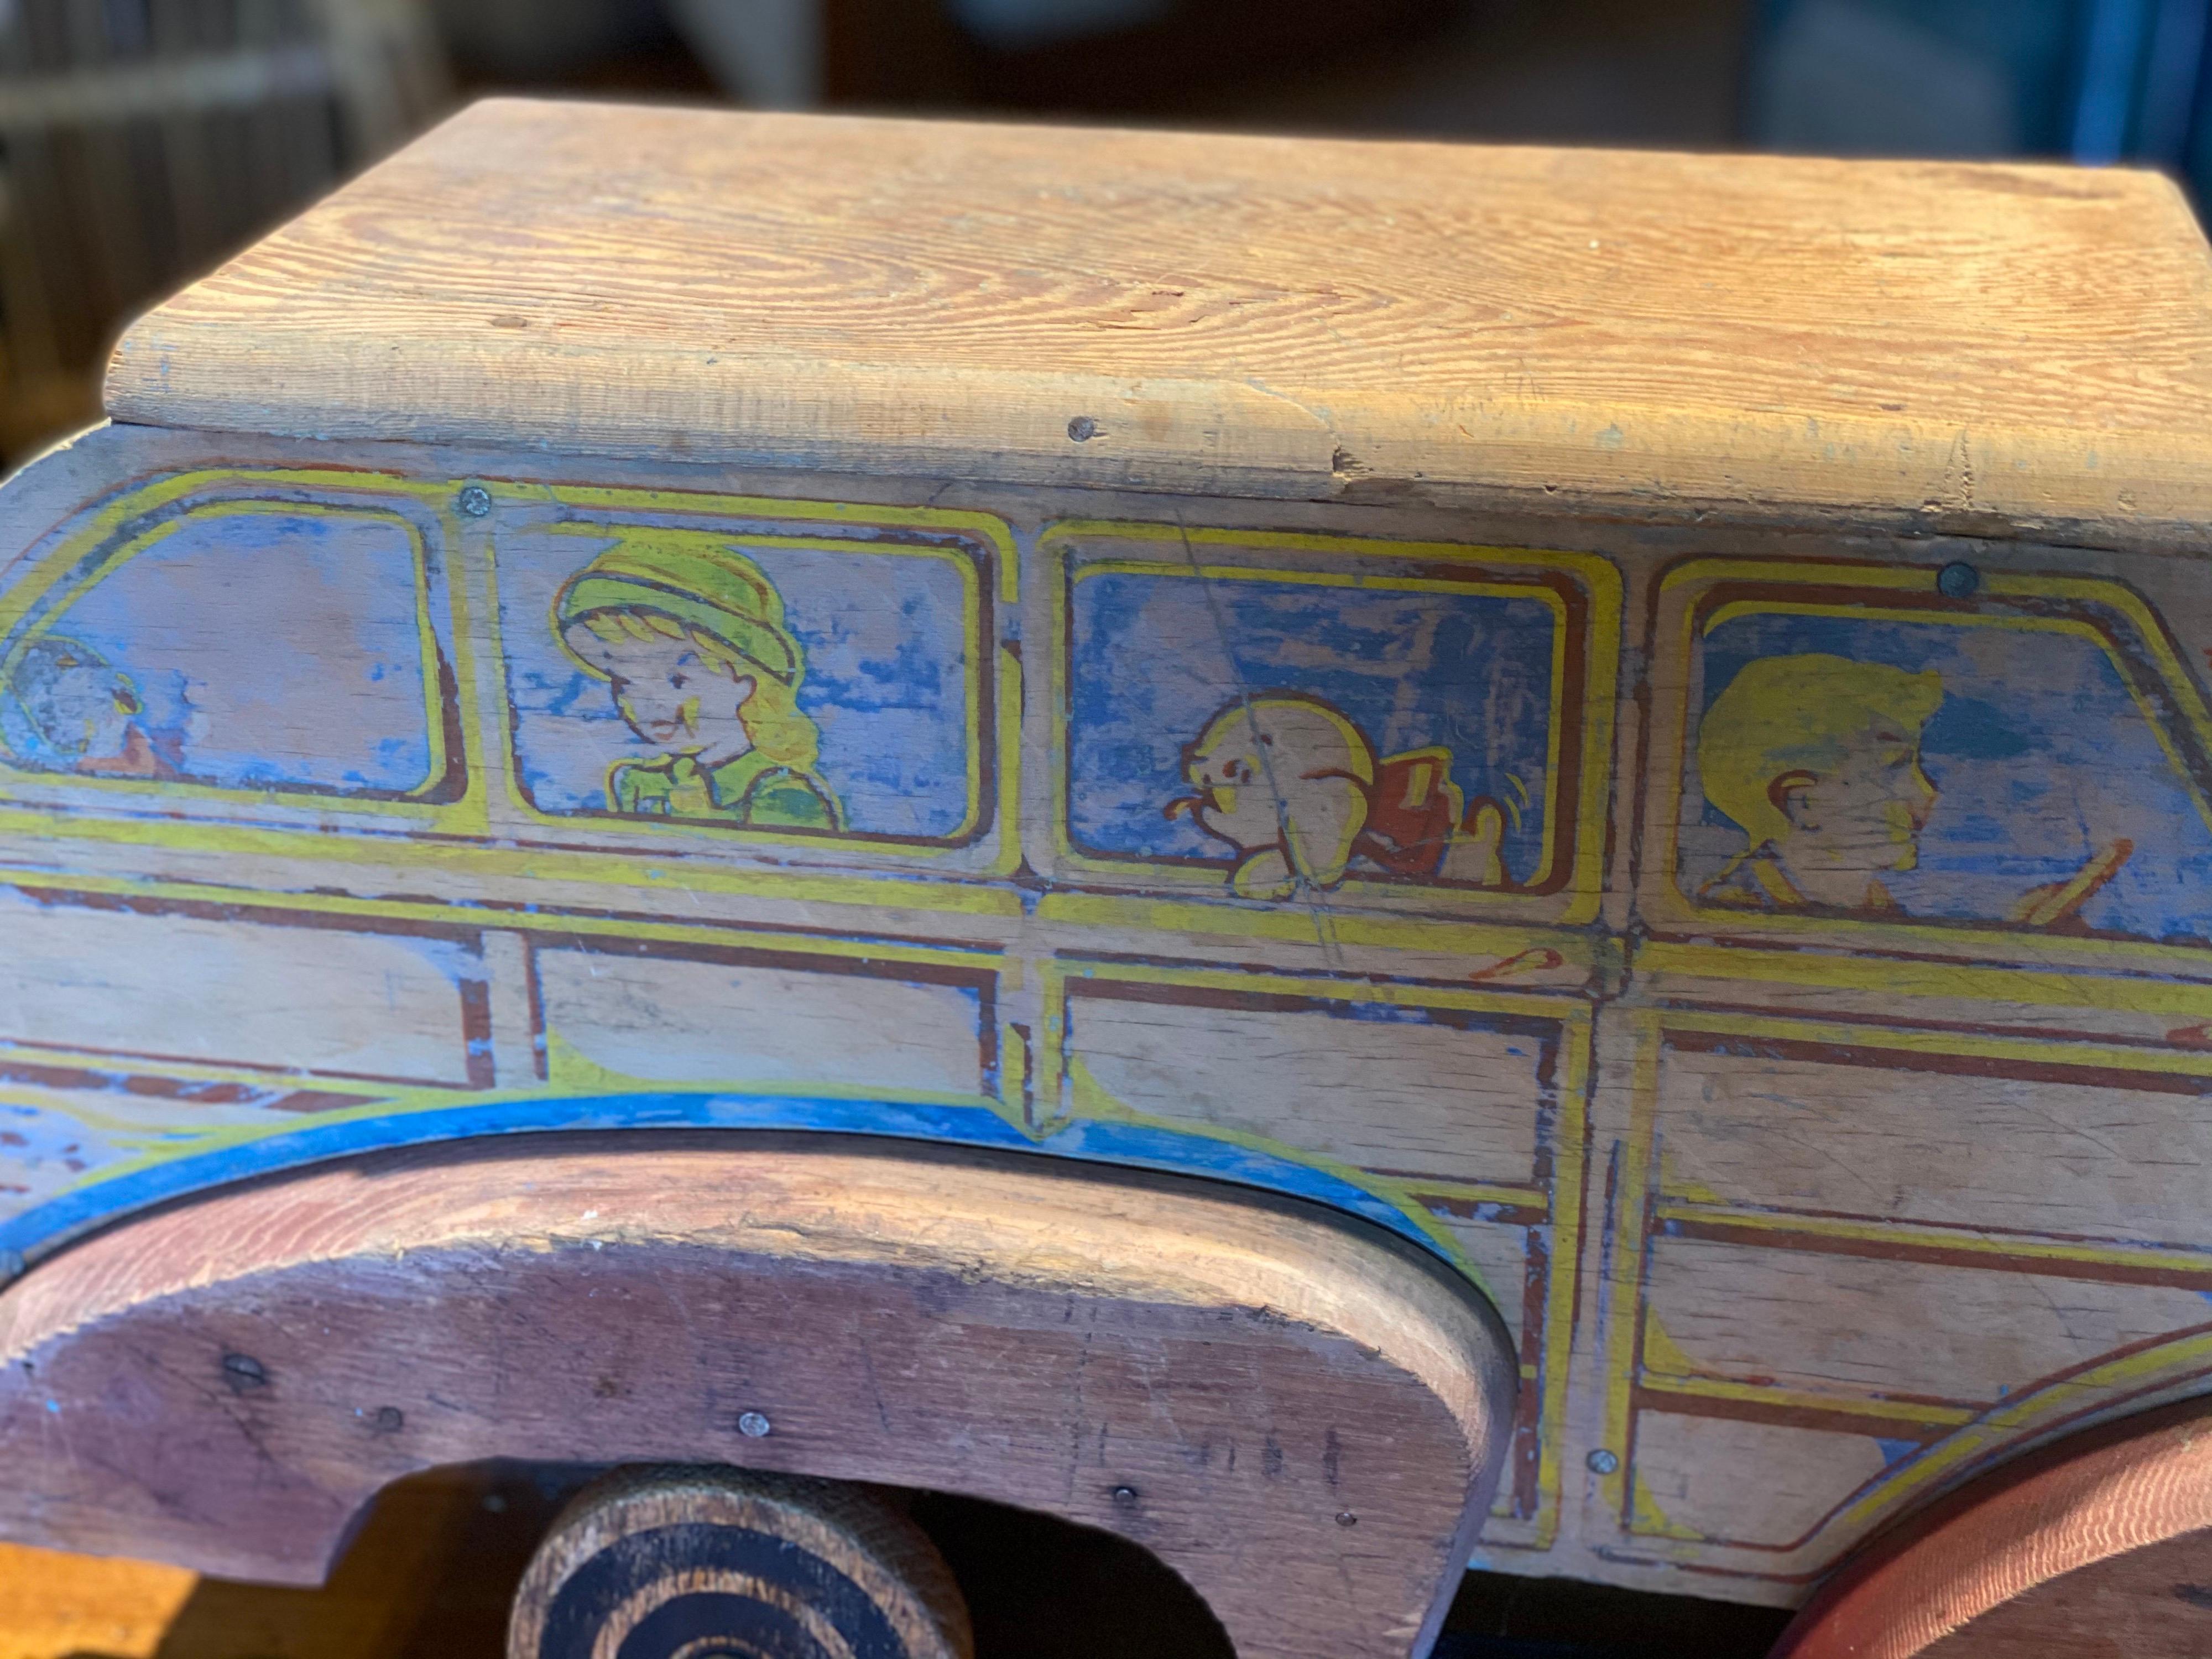 American Painted and Carved Toy 'Woody' Car, circa 1930s-1940s